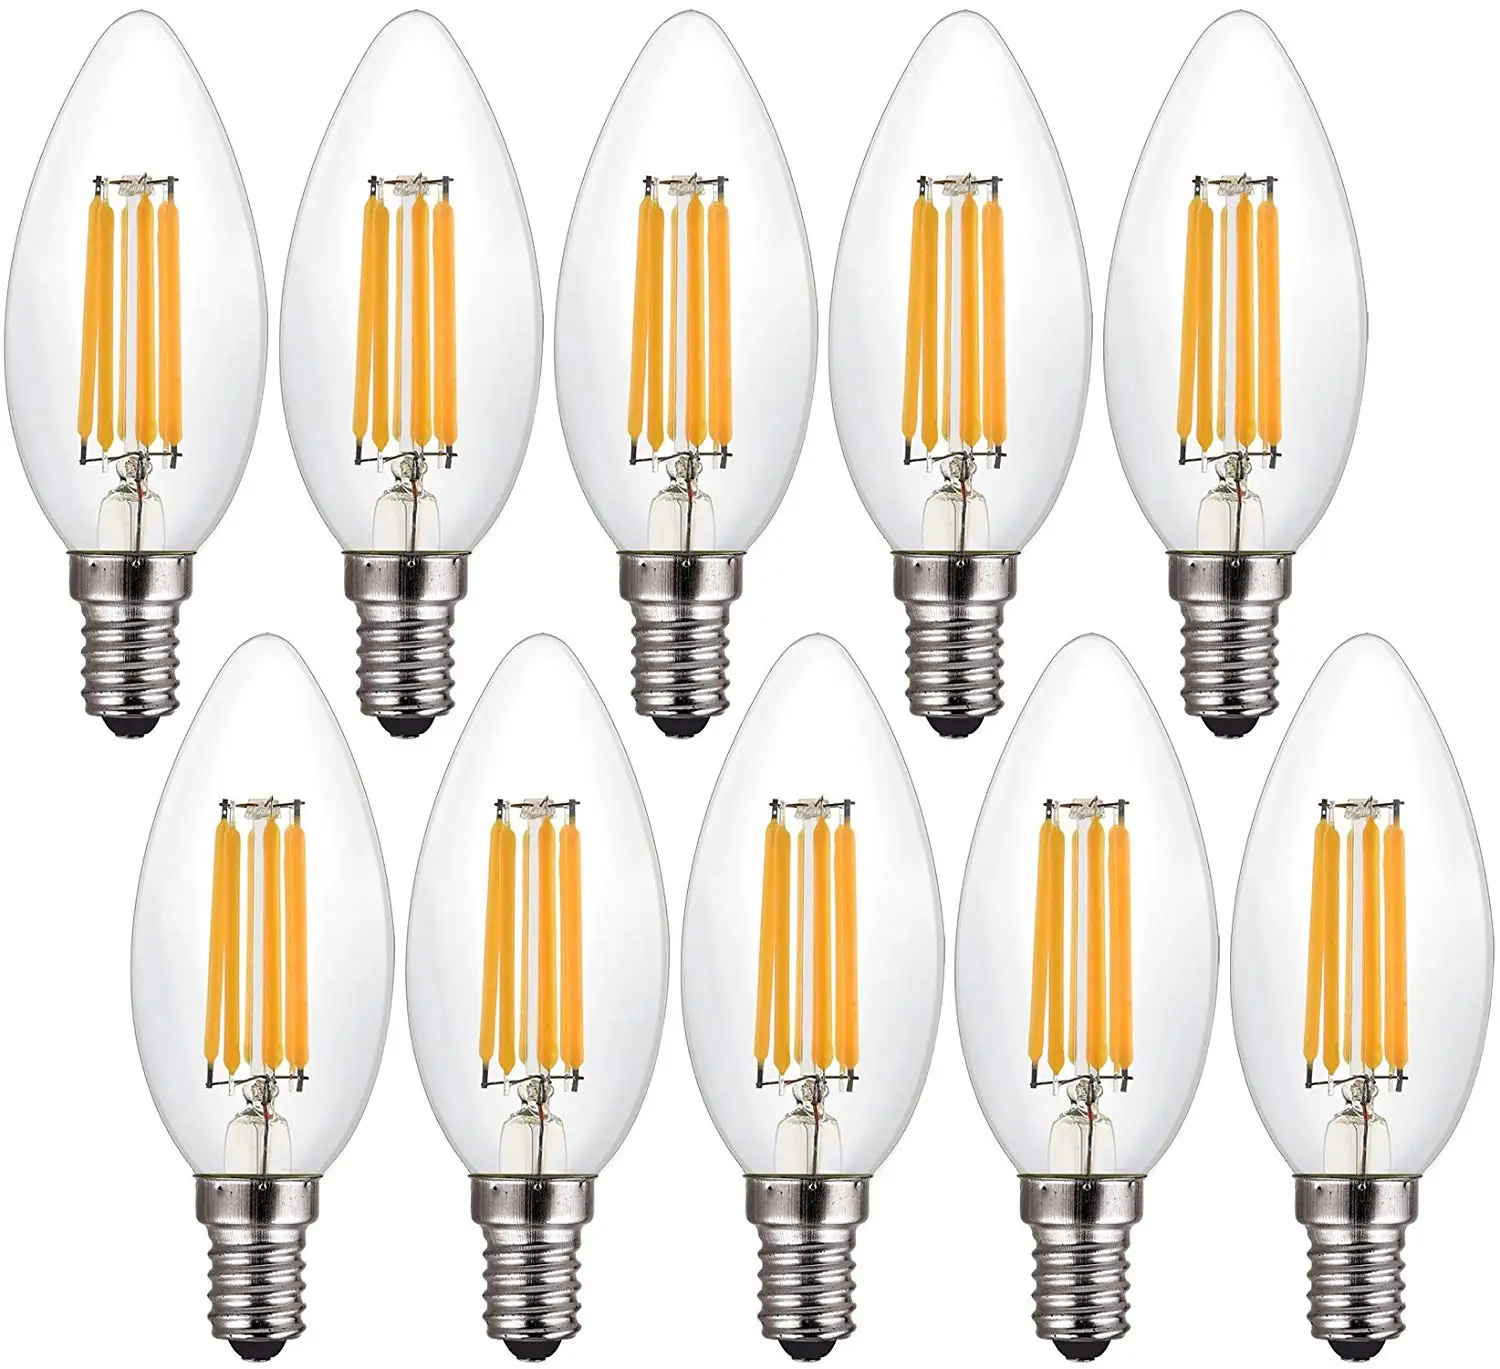 Candle C35 LED filament bulb 4W 110V E12 3000K 5000K Dimmable from Amazon sells color light bulbs